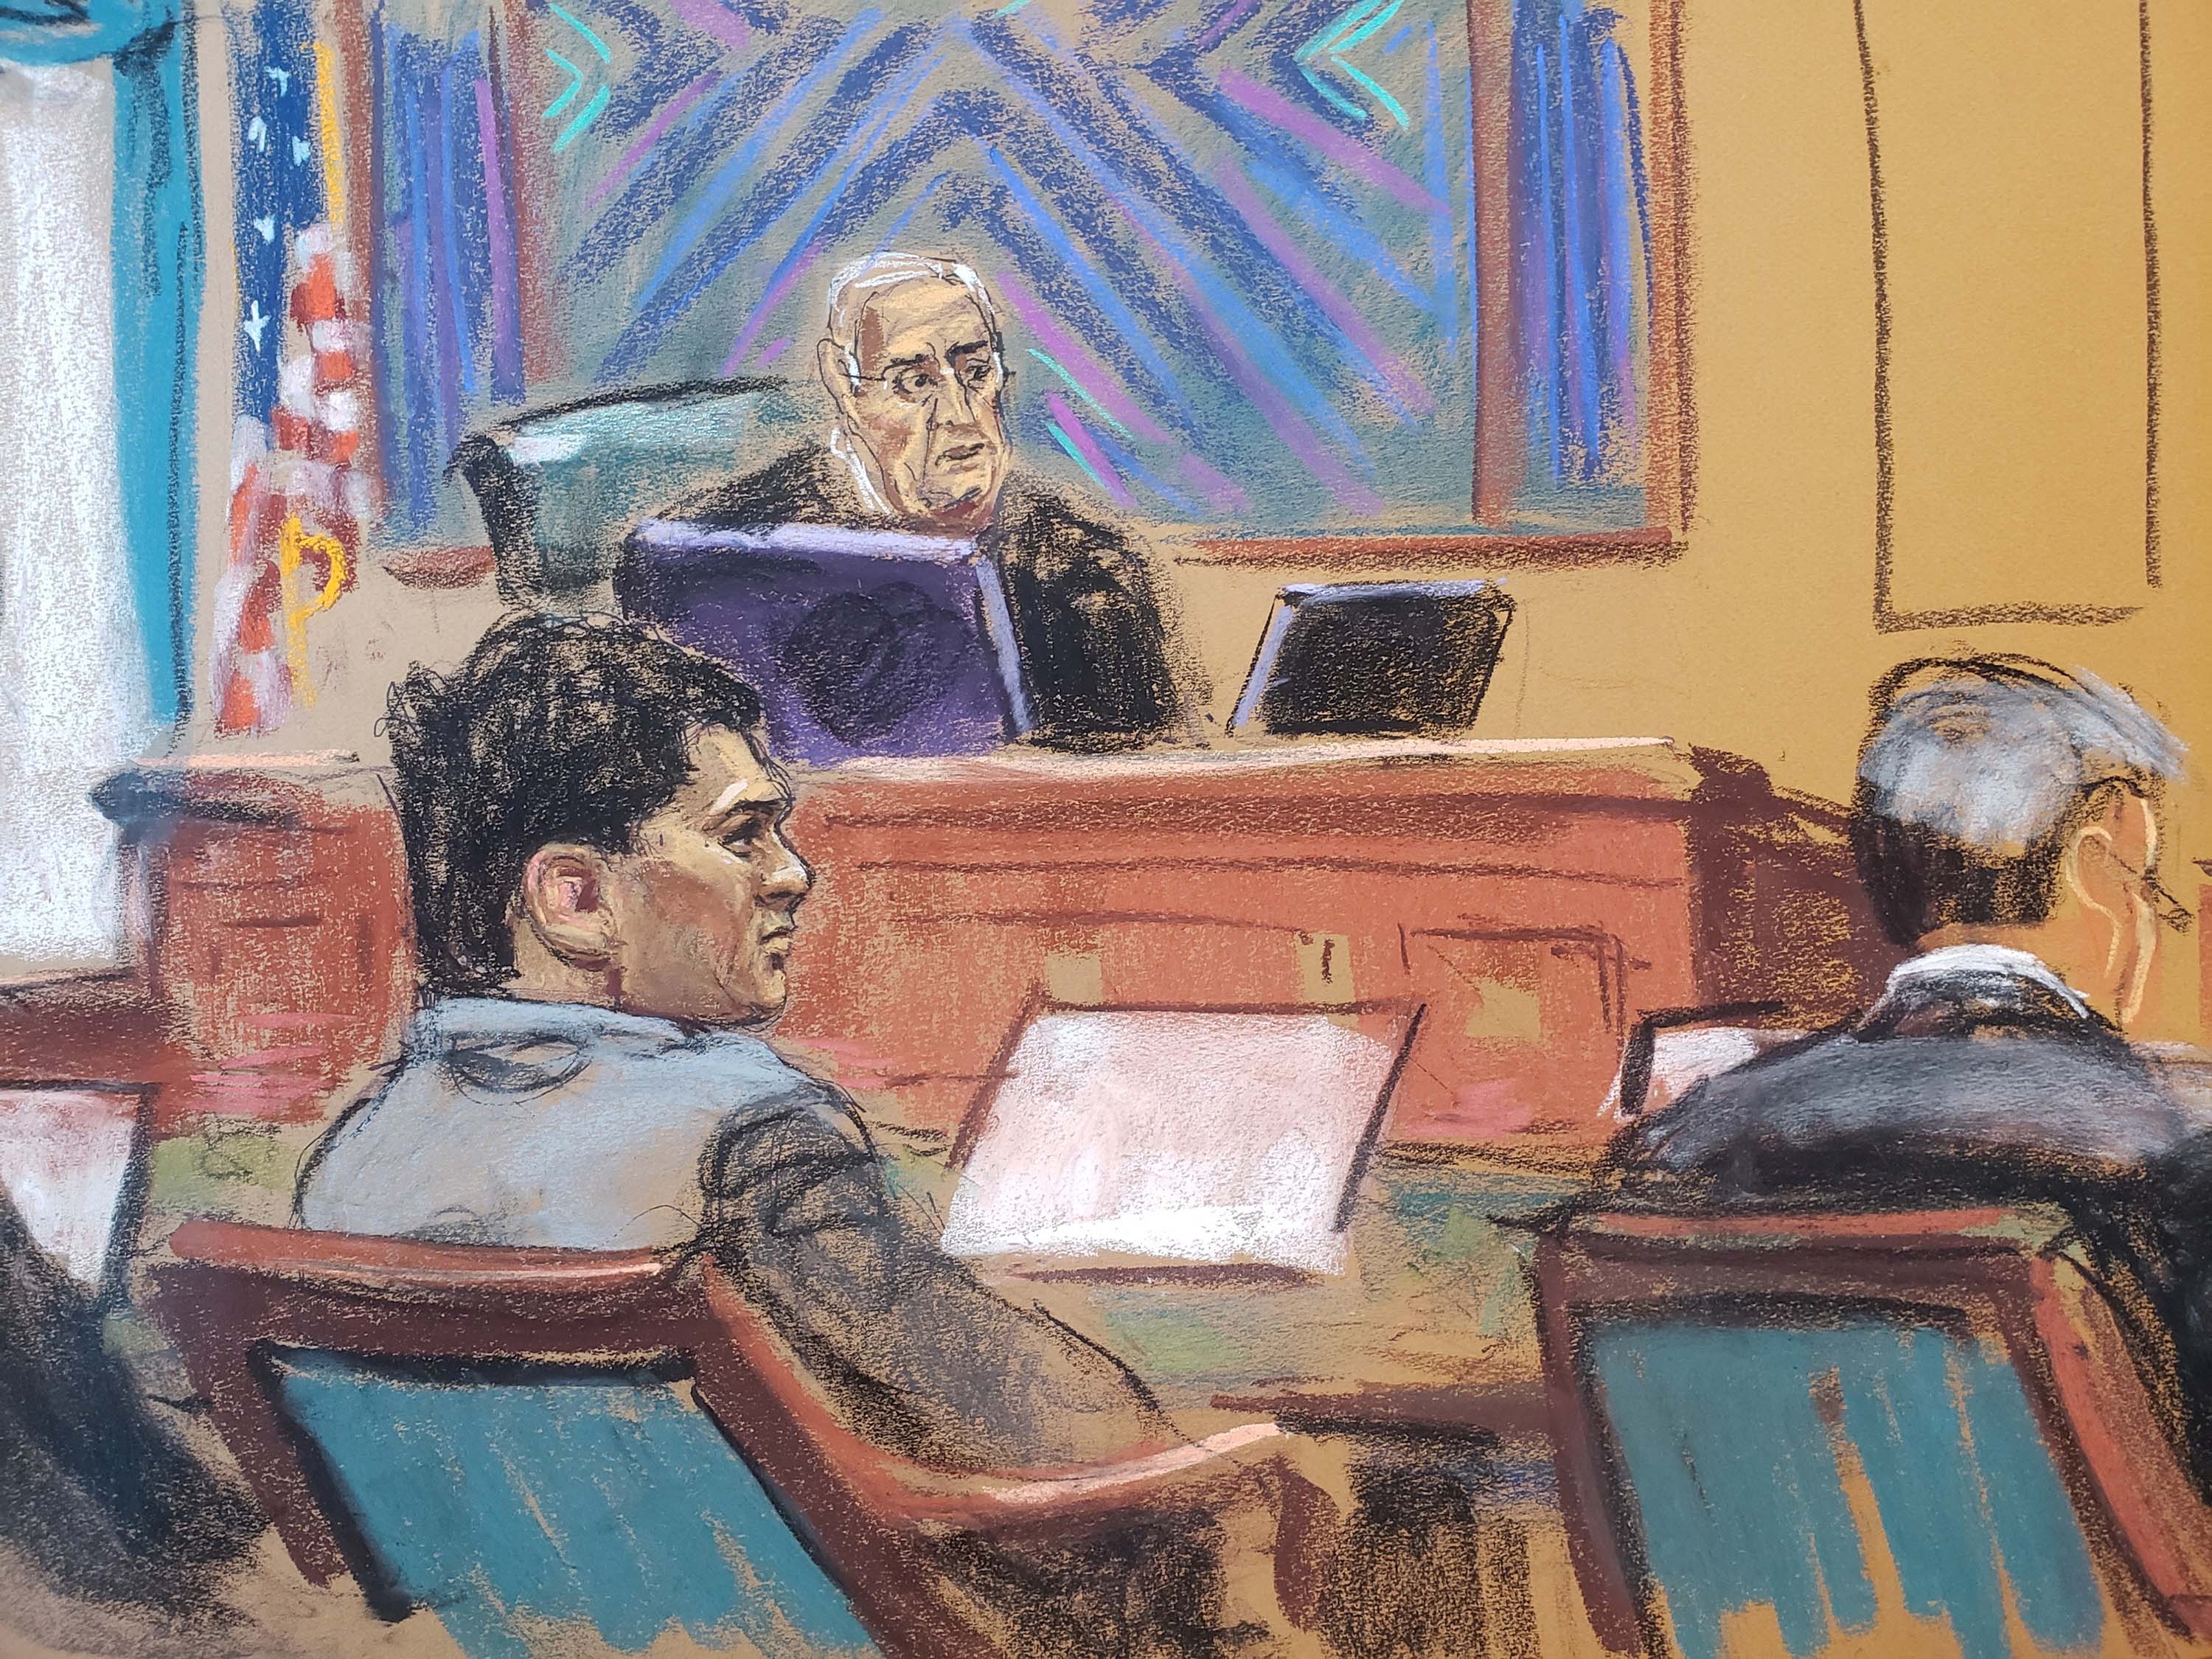 FTX founder Sam Bankman-Fried looks on during his fraud trial over the collapse of the bankrupt cryptocurrency exchange as U.S. District Judge Lewis Kaplan gives instructions to the jury and sends them out to deliberate, at federal court in New York City, on November 2, in this courtroom sketch.